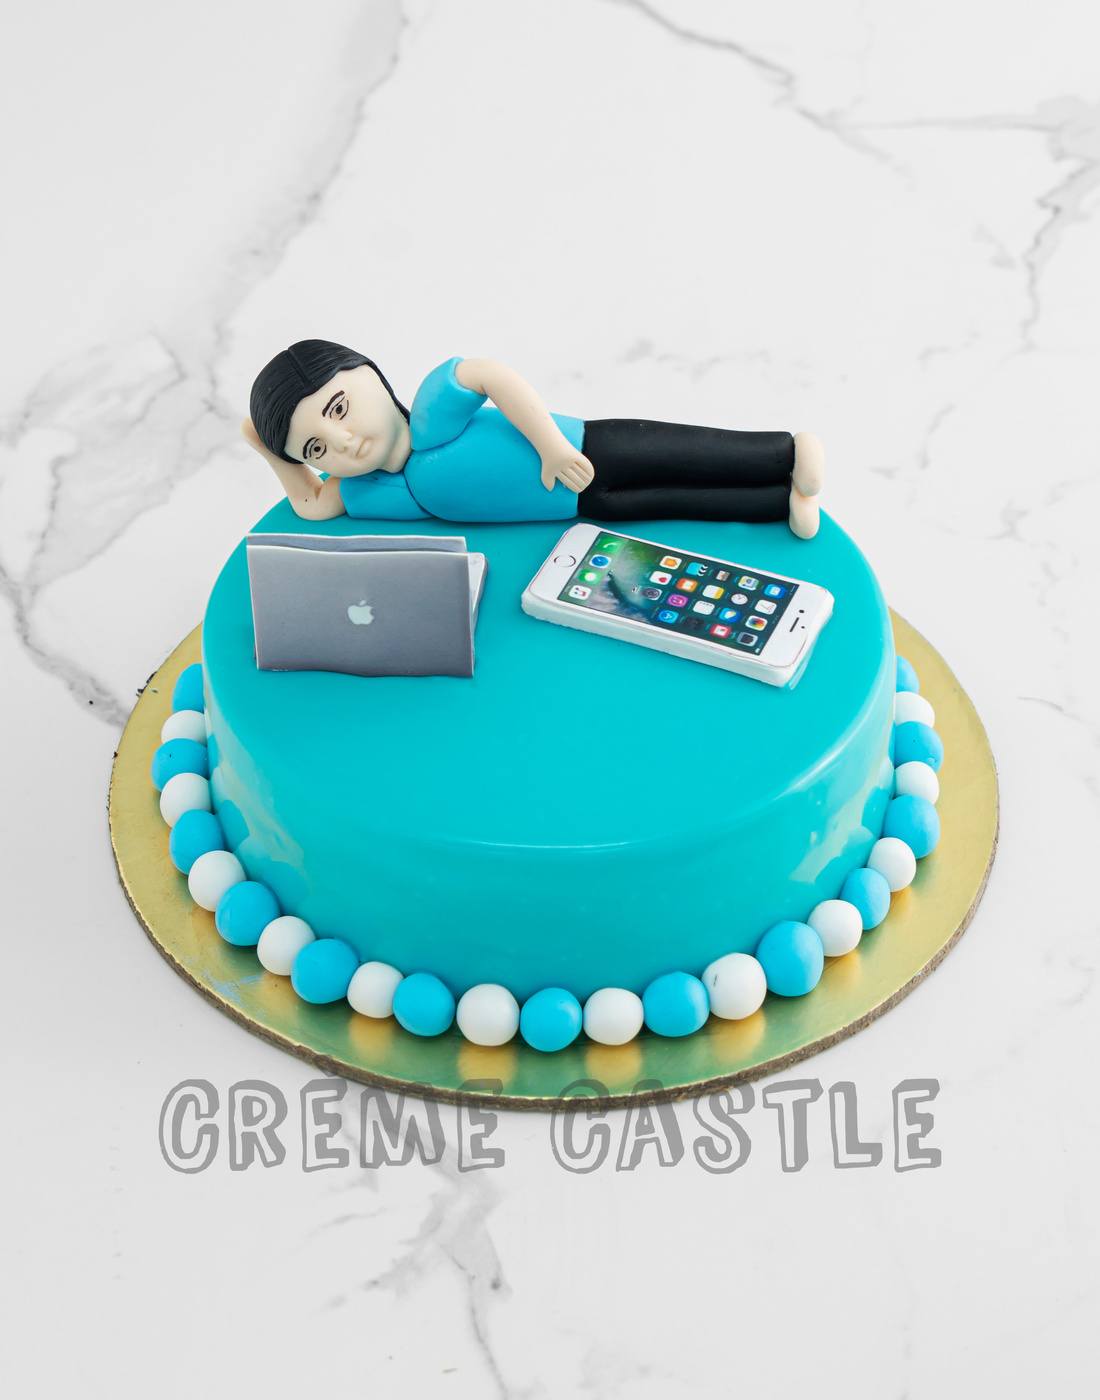 Cakes for Men | Cakes for Husband or Fiance - Cakes and Bakes